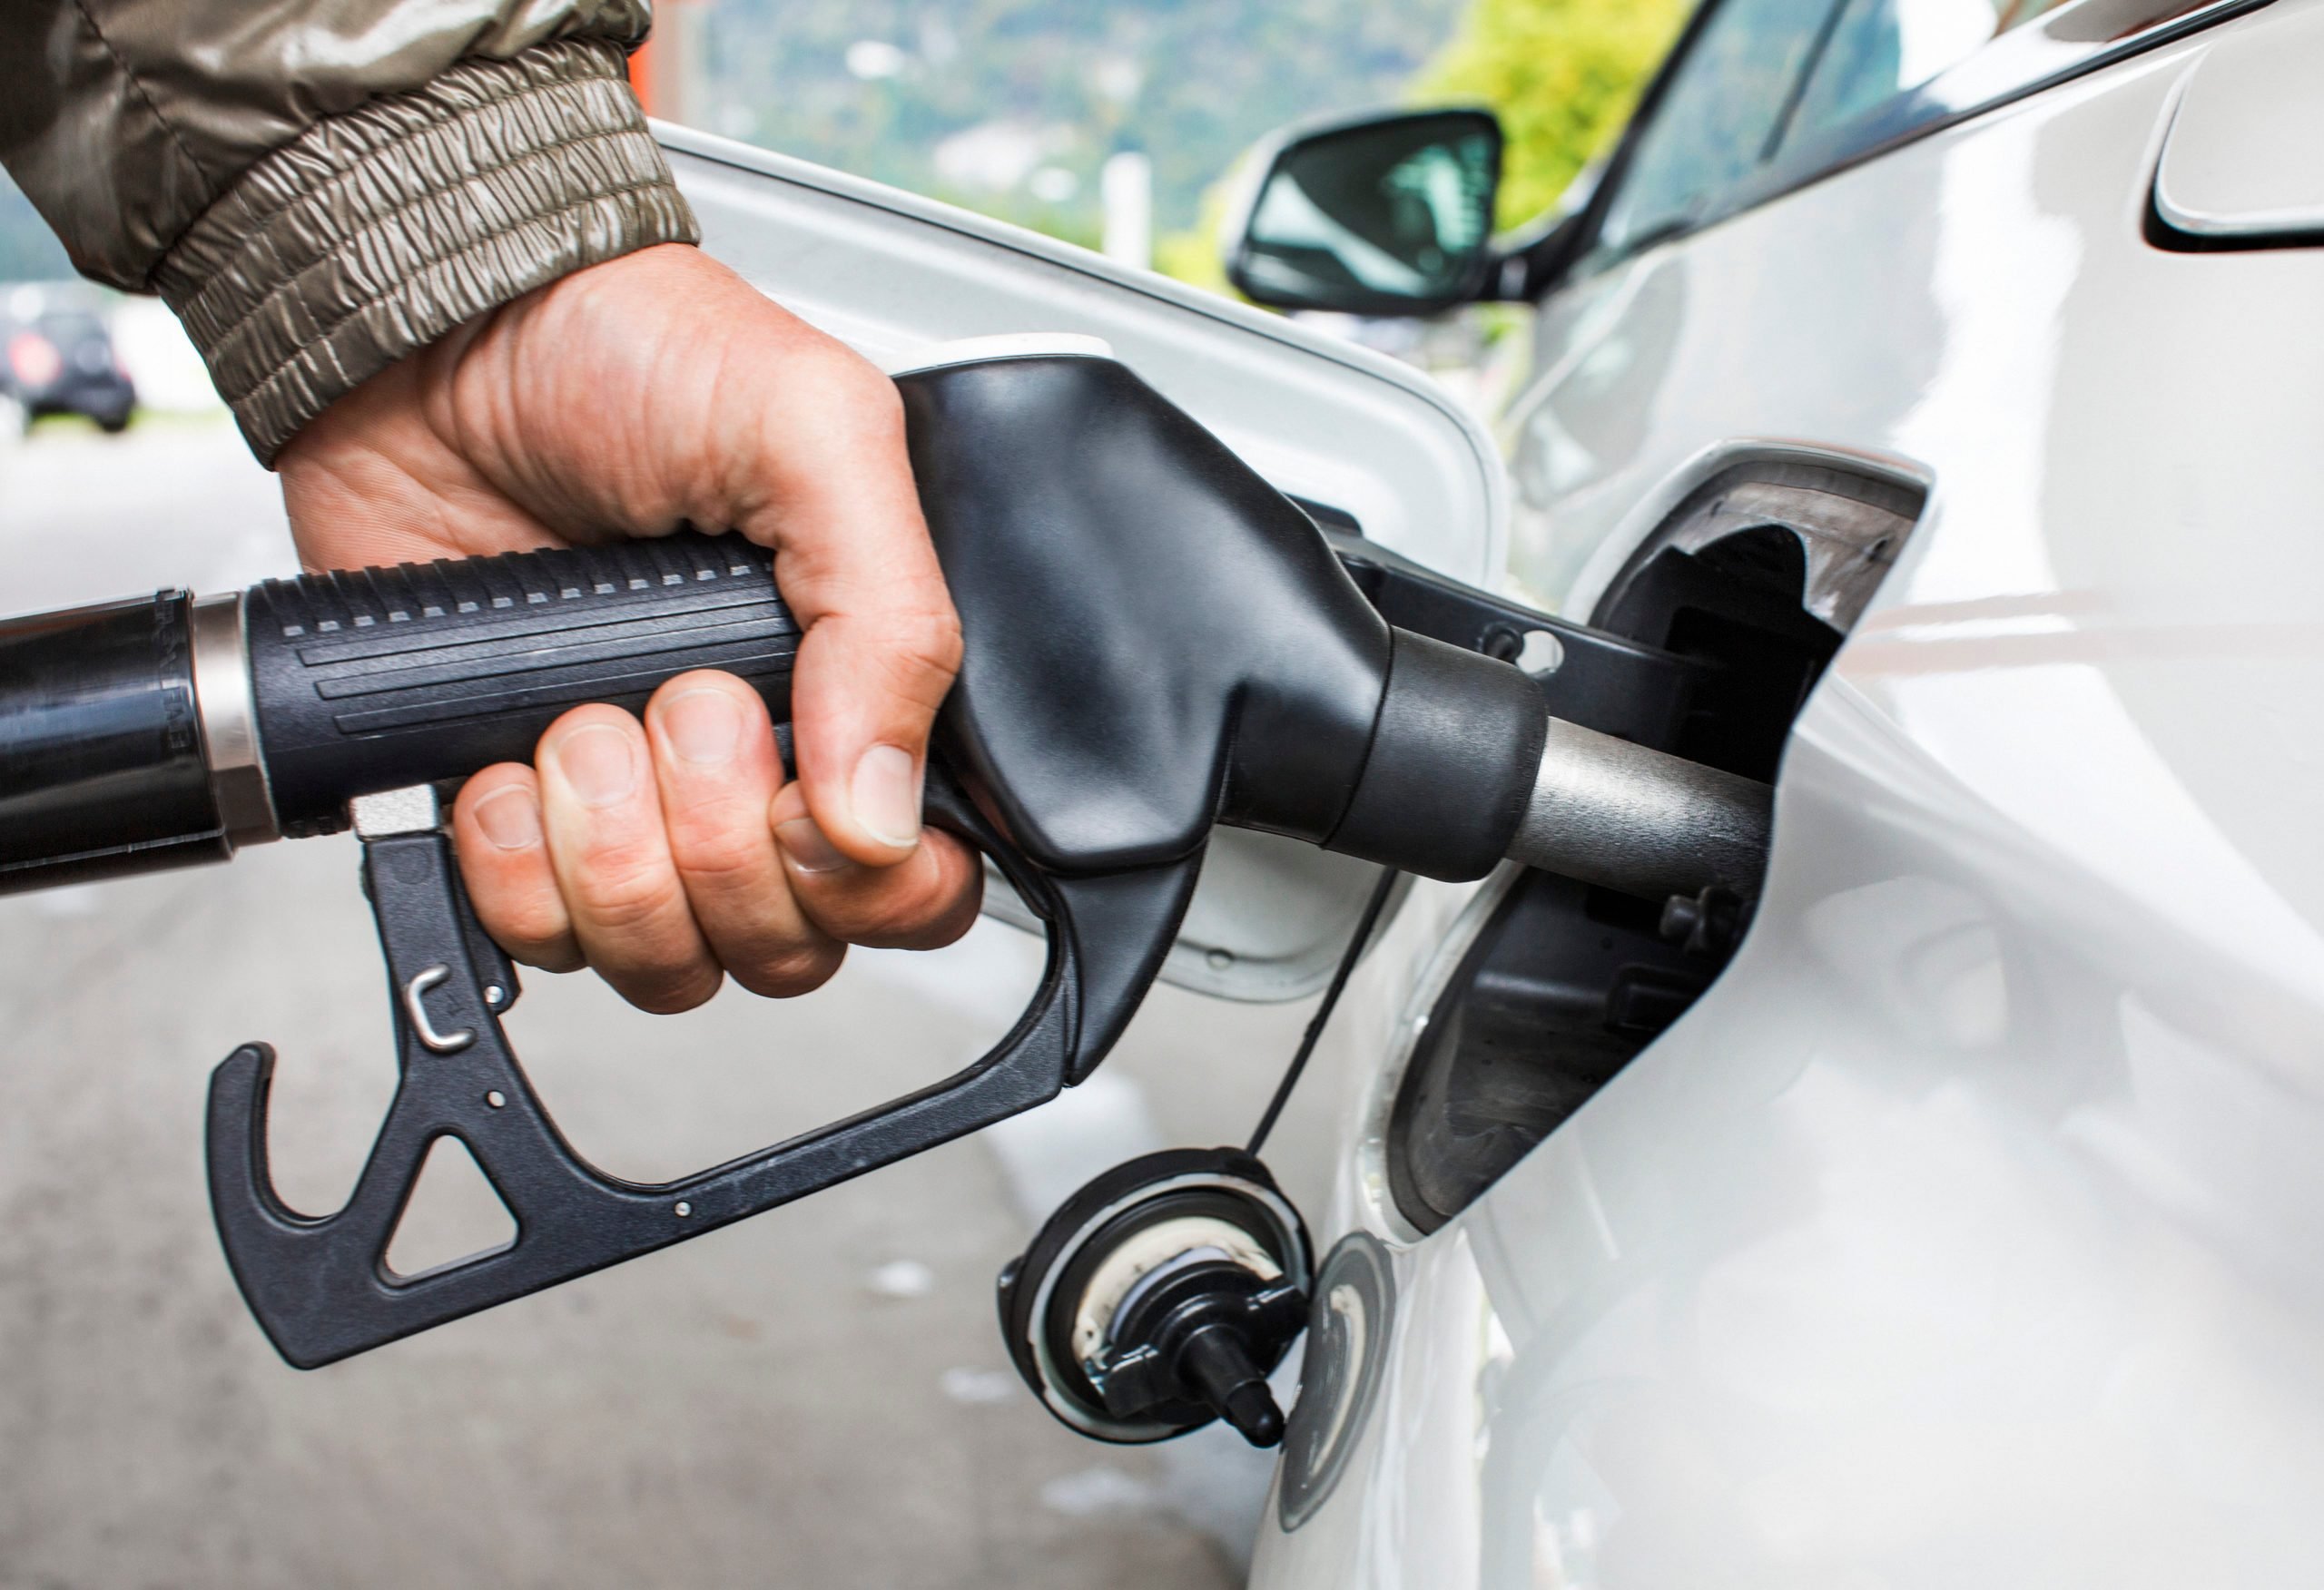 10 Easiest Ways To Find The Cheapest Gas In Your Area